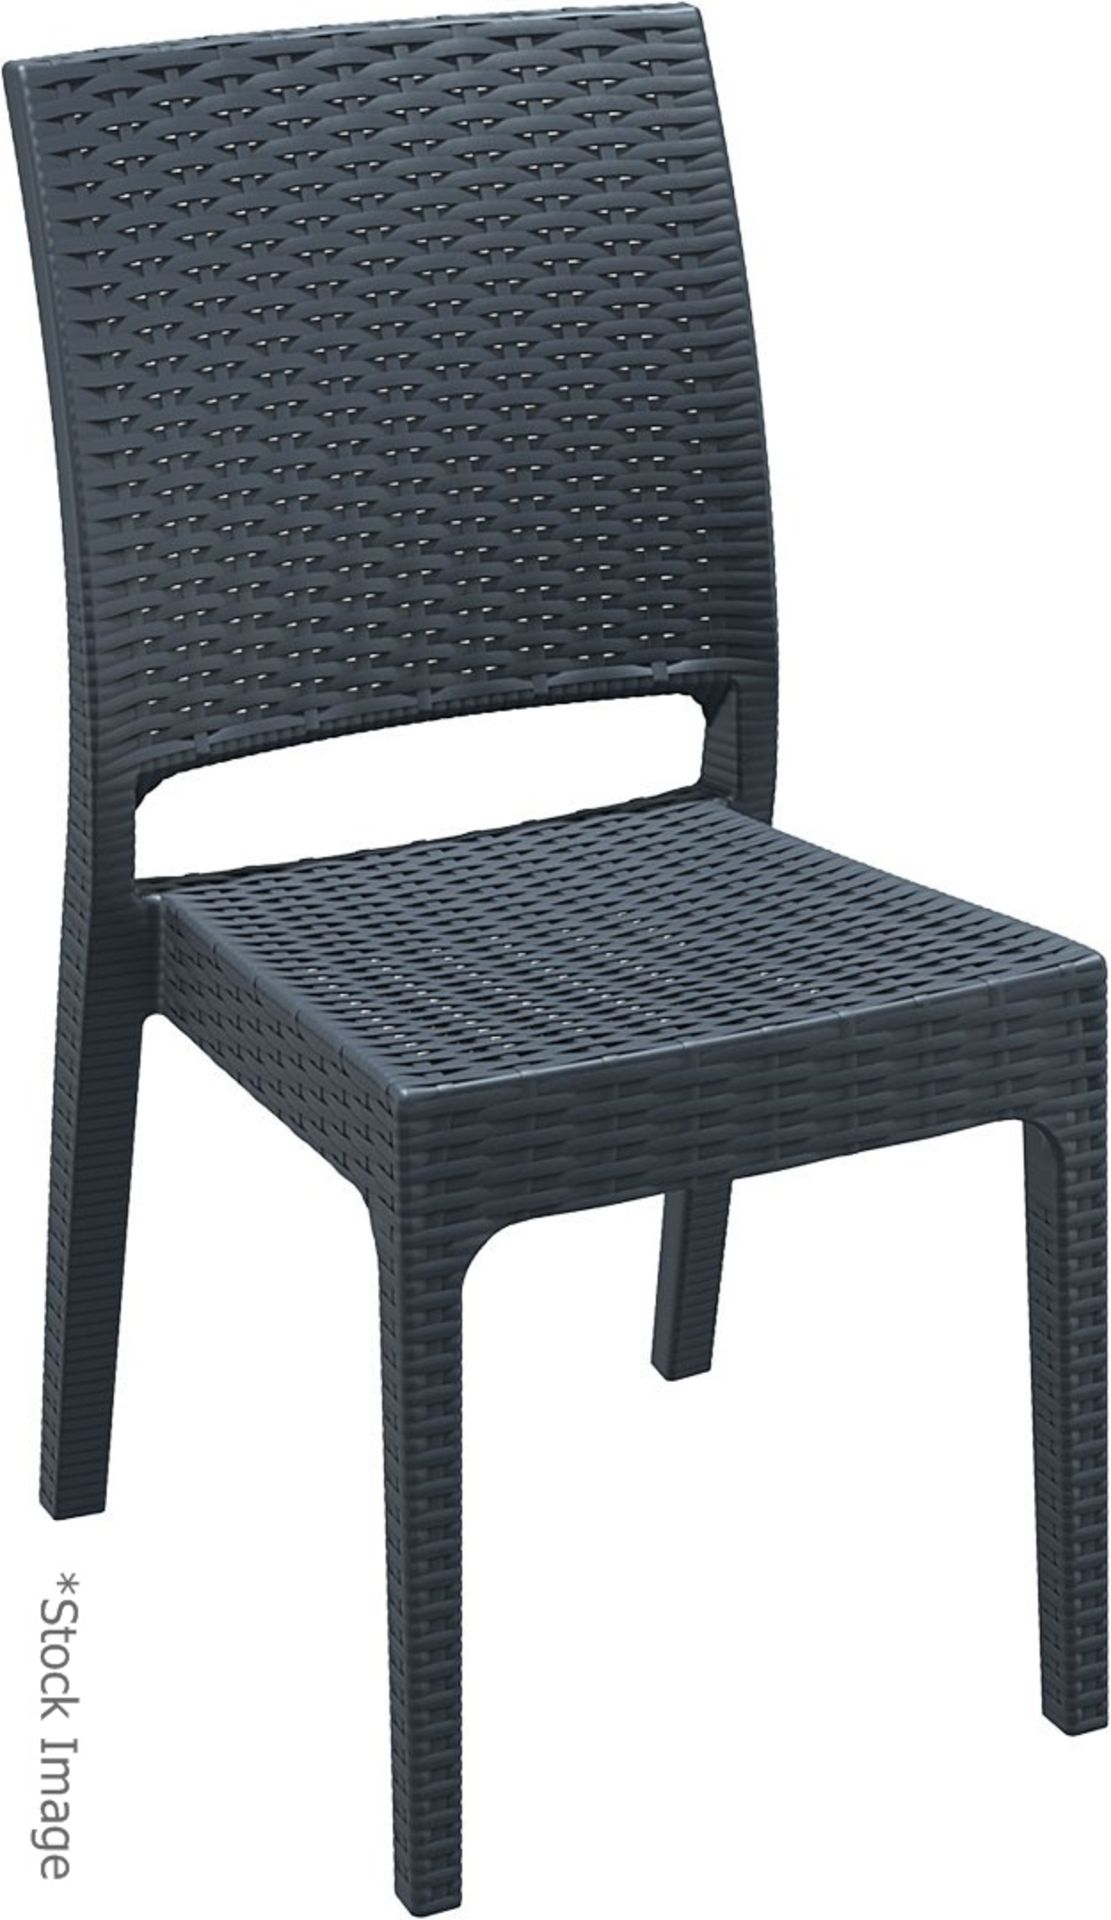 8 x SIESTA EXCLUSIVE 'Florida' Commercial Stackable Rattan-style Chairs In Dark Grey - CL987 - - Image 11 of 13